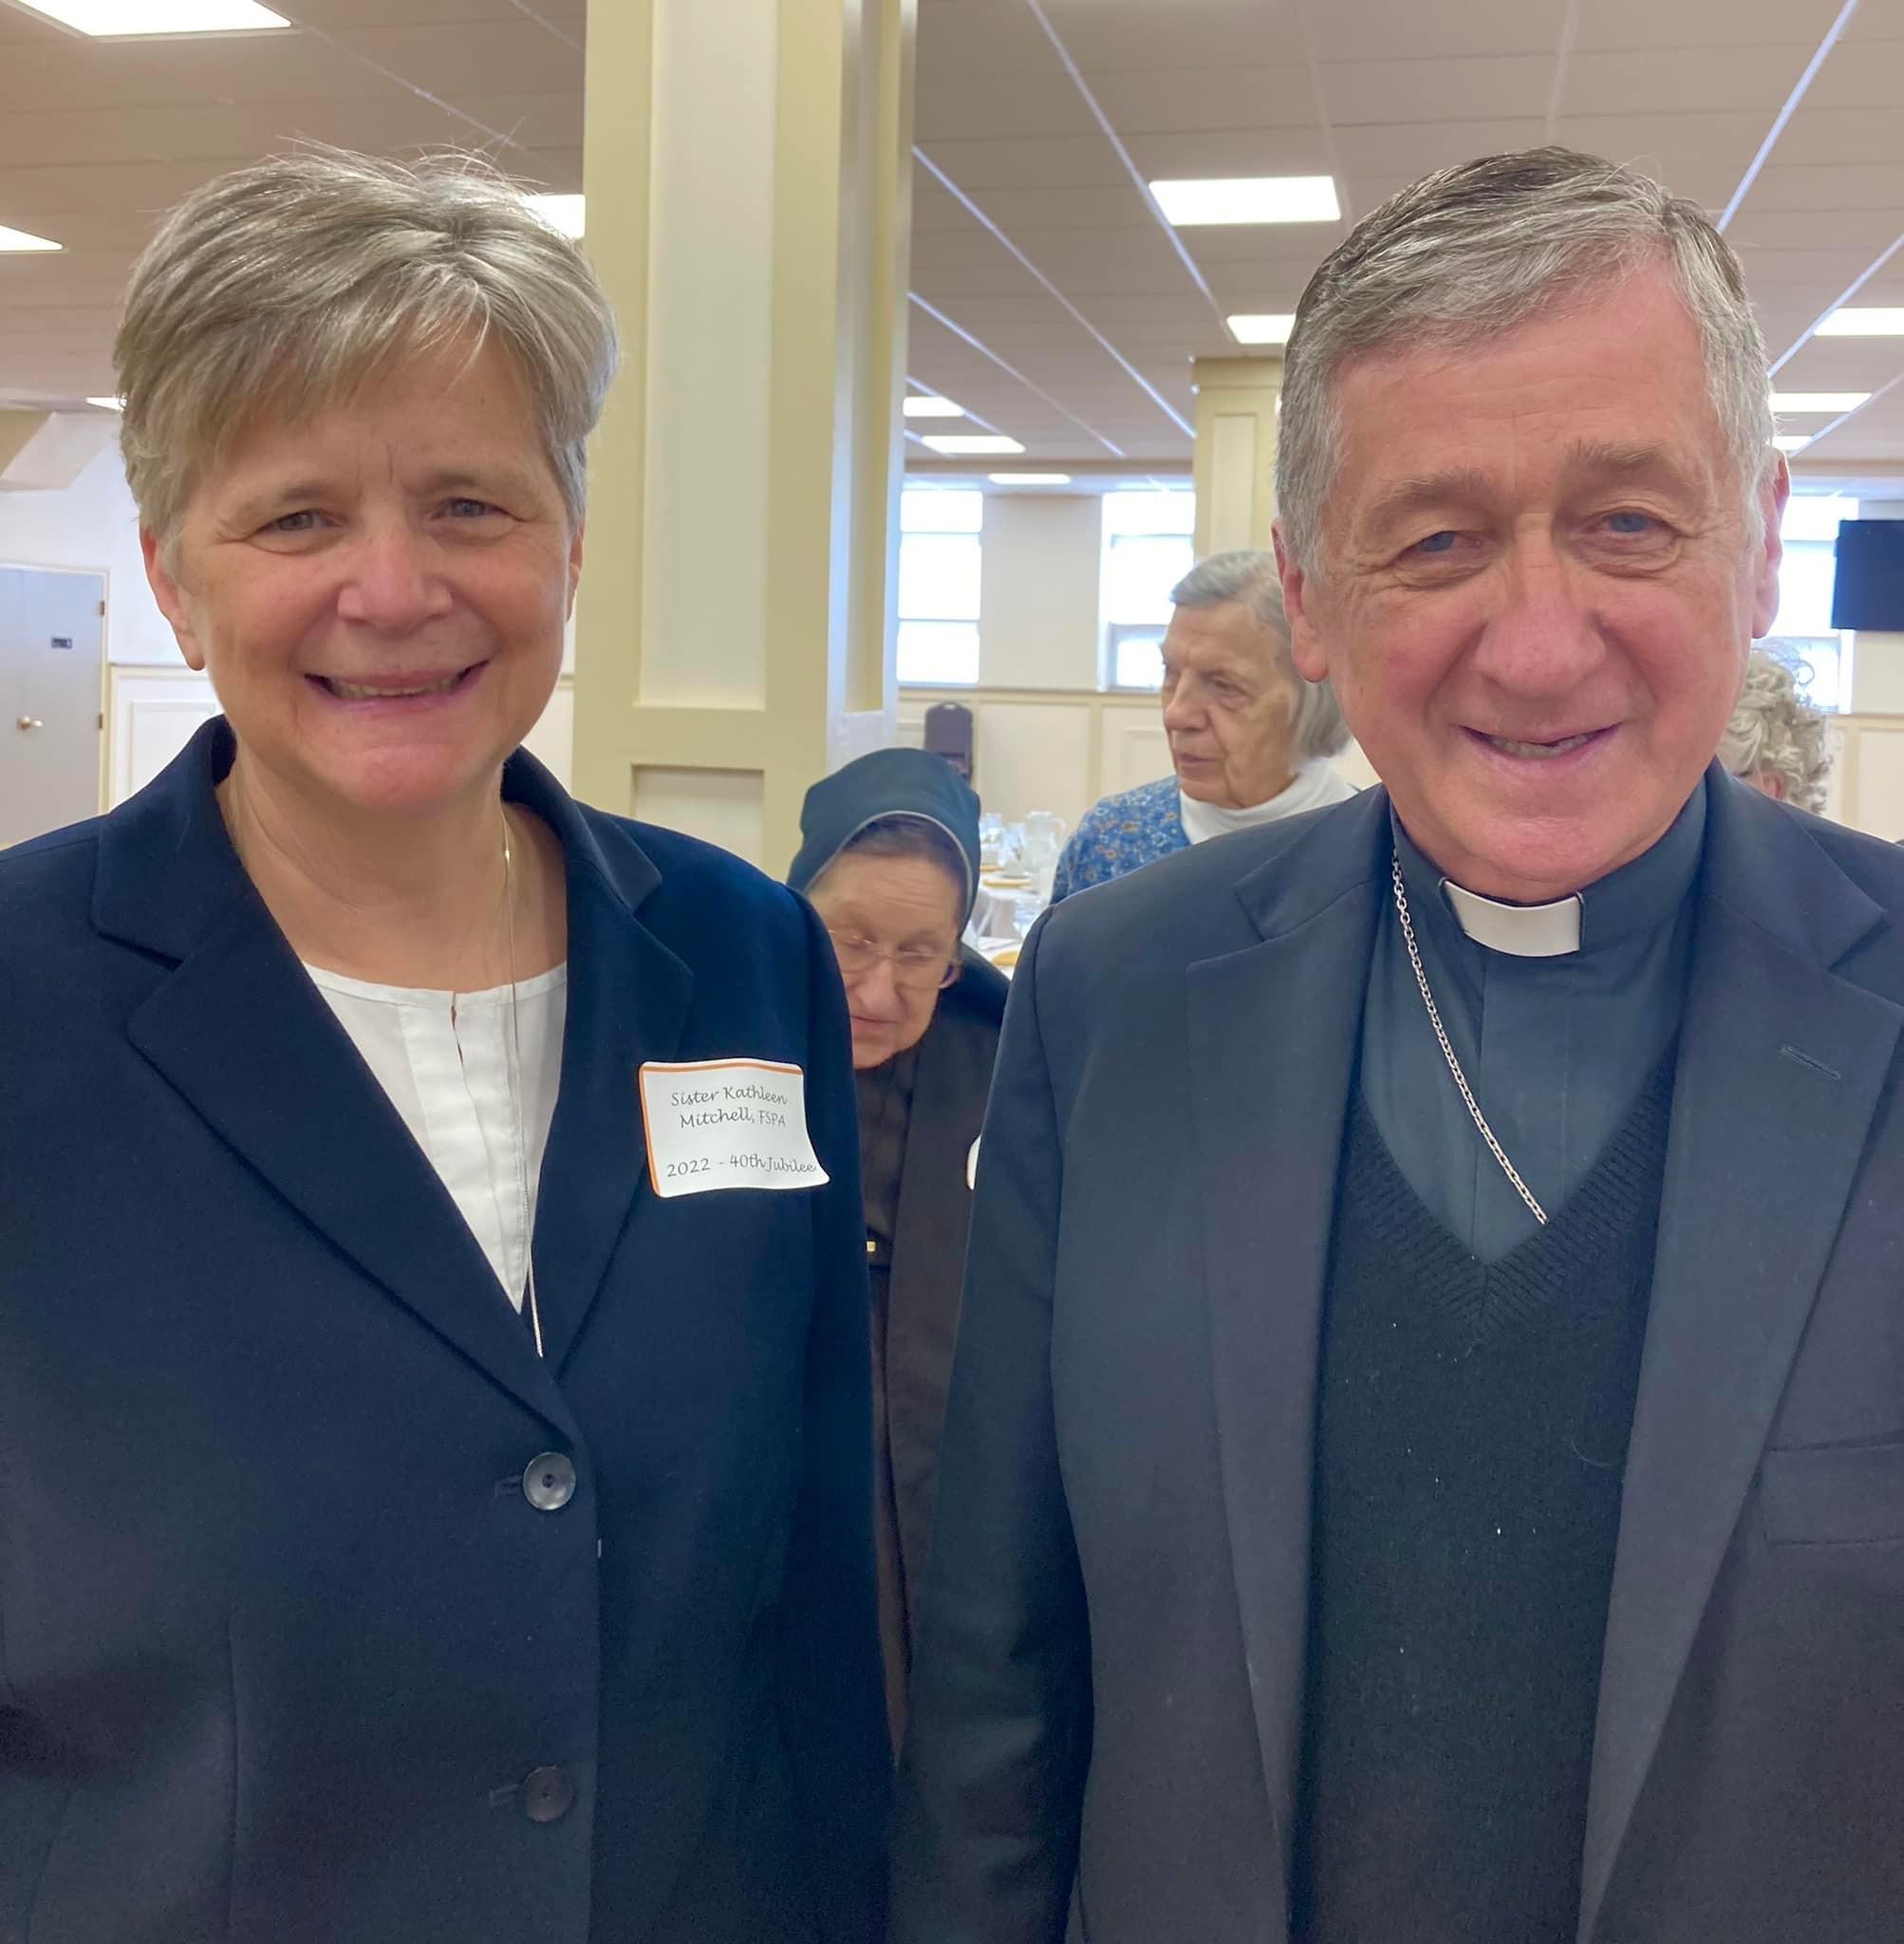 Sister Katie Mitchell poses with a priest during her 40th jubilee celebration